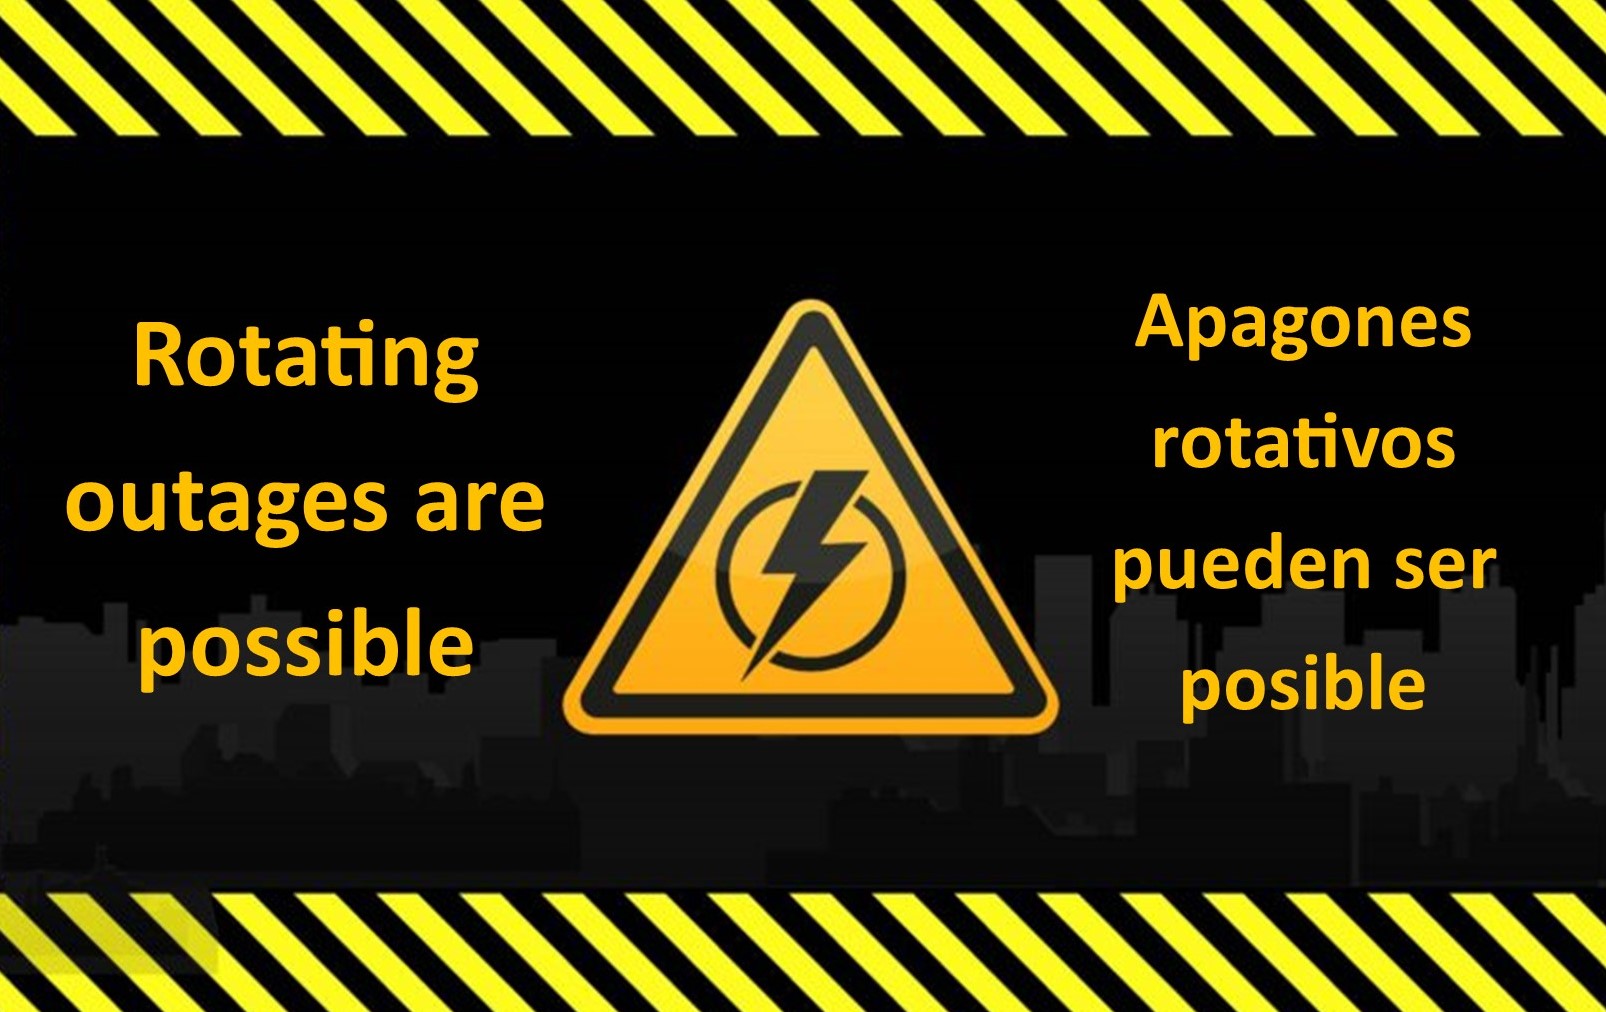 Black background with yellow sign with lightening bolt